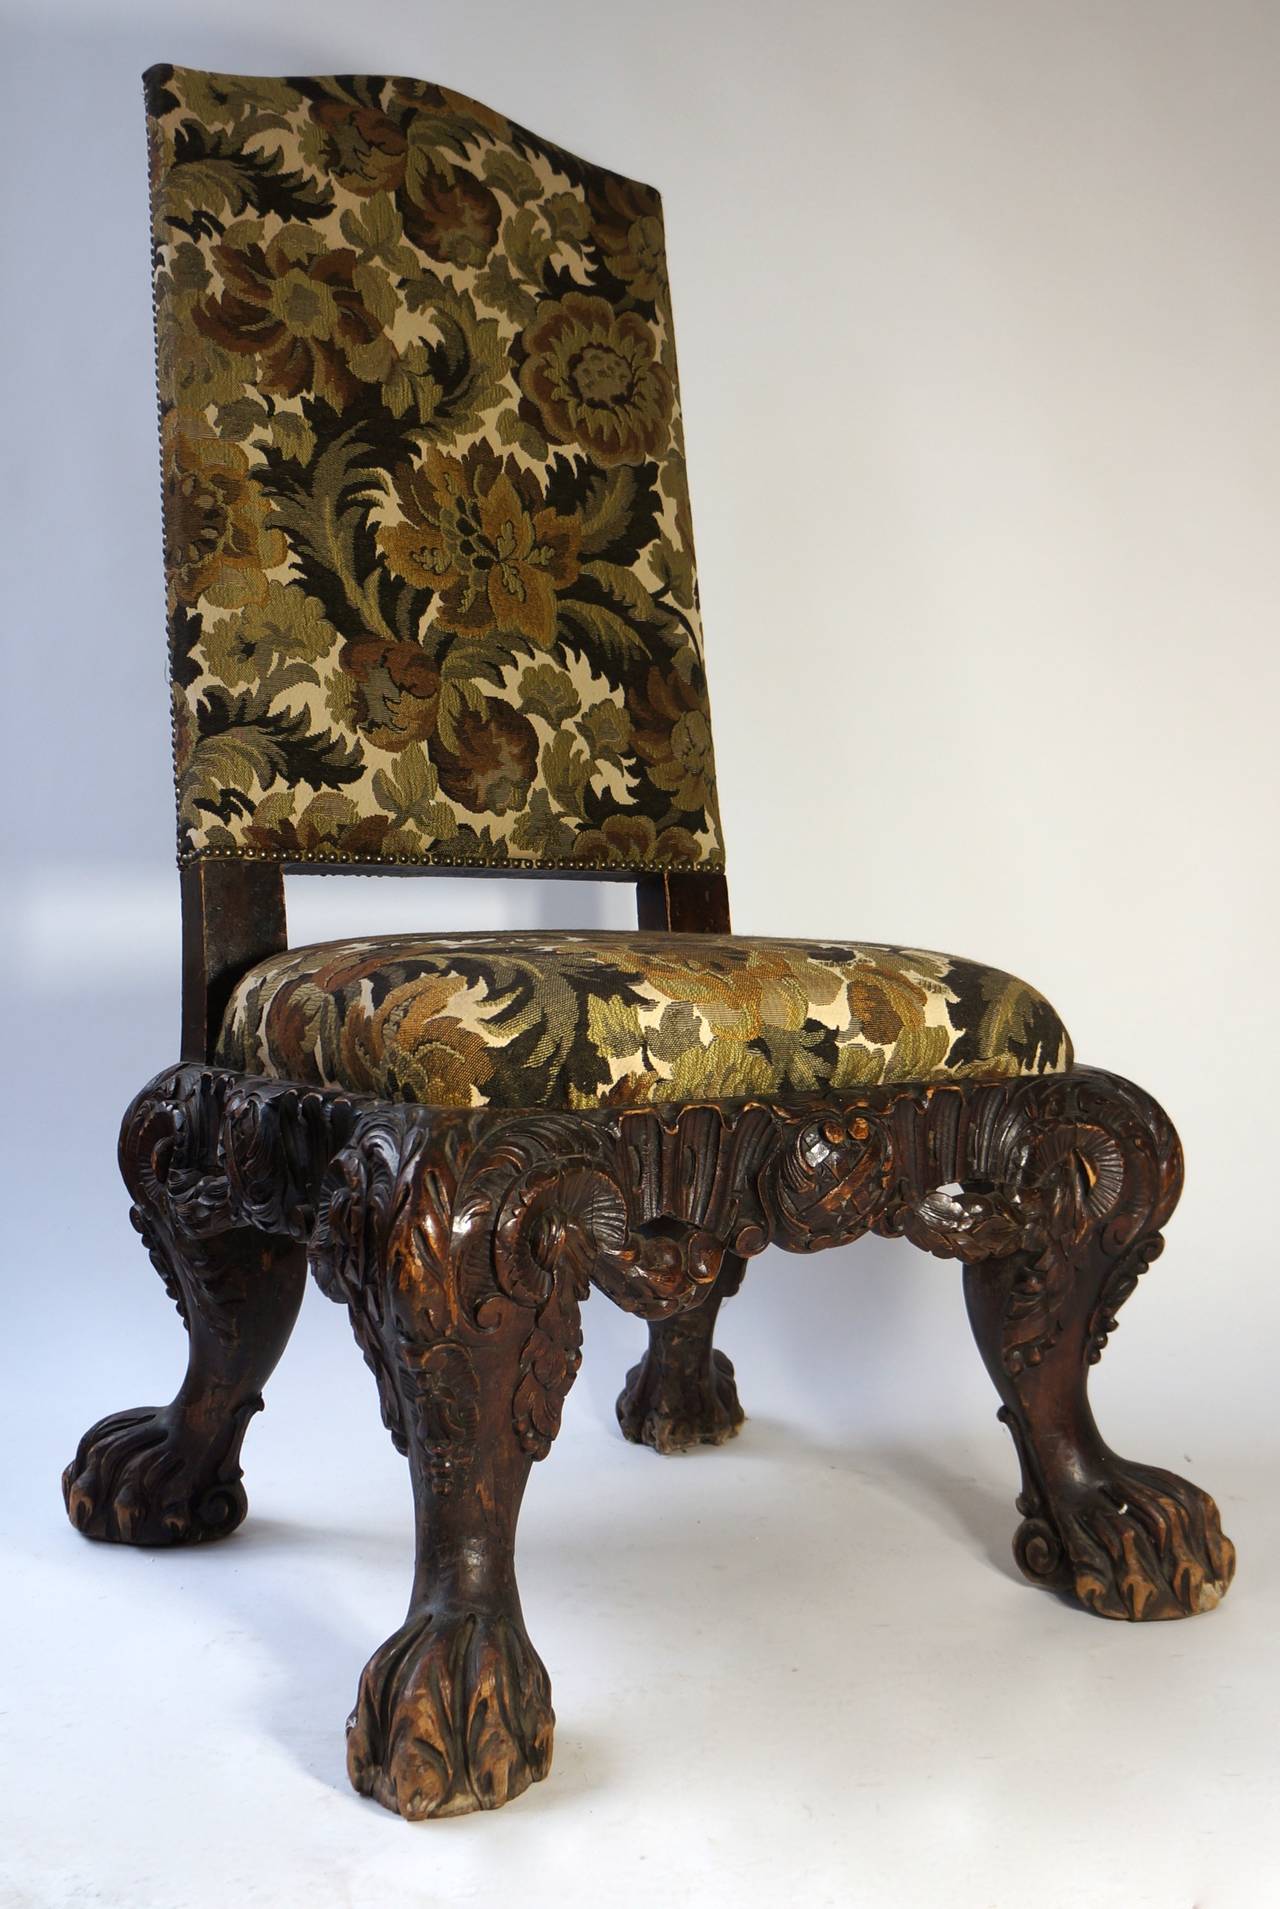 Italian carved barok style chair with claw feet.